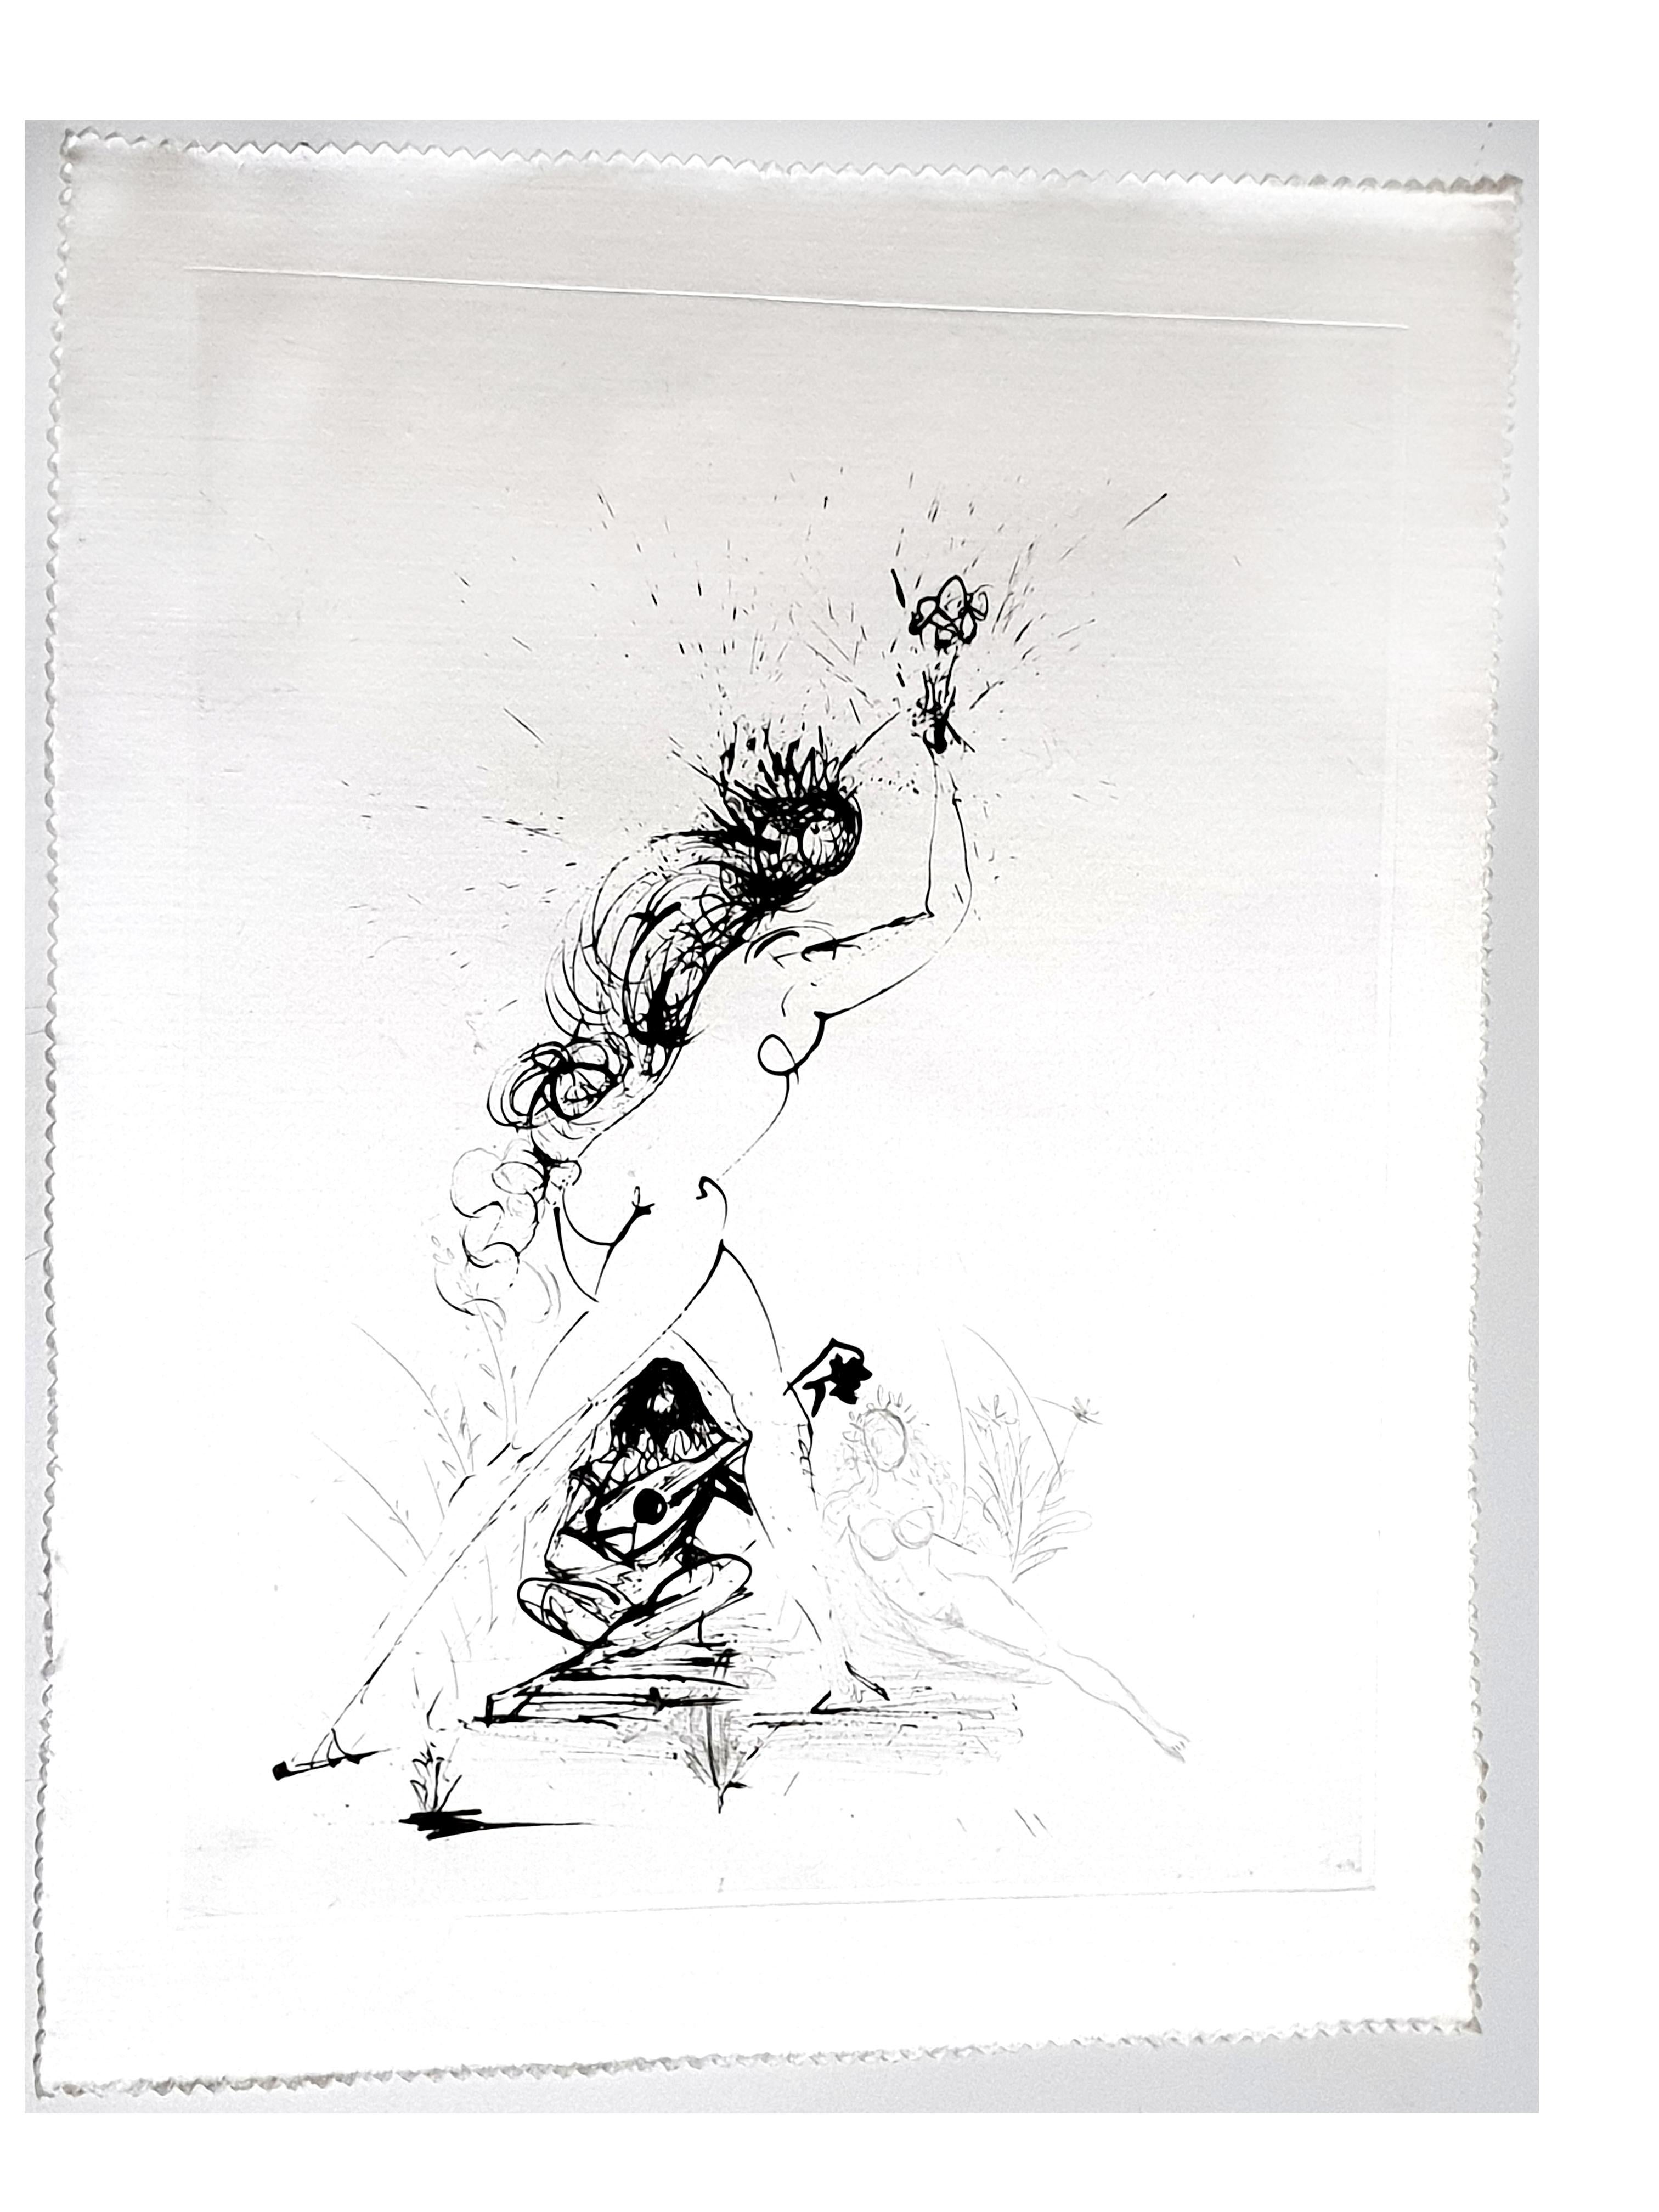 Salvador Dali - Girl With Torch - Original Etching on Silk - Print by Salvador Dalí